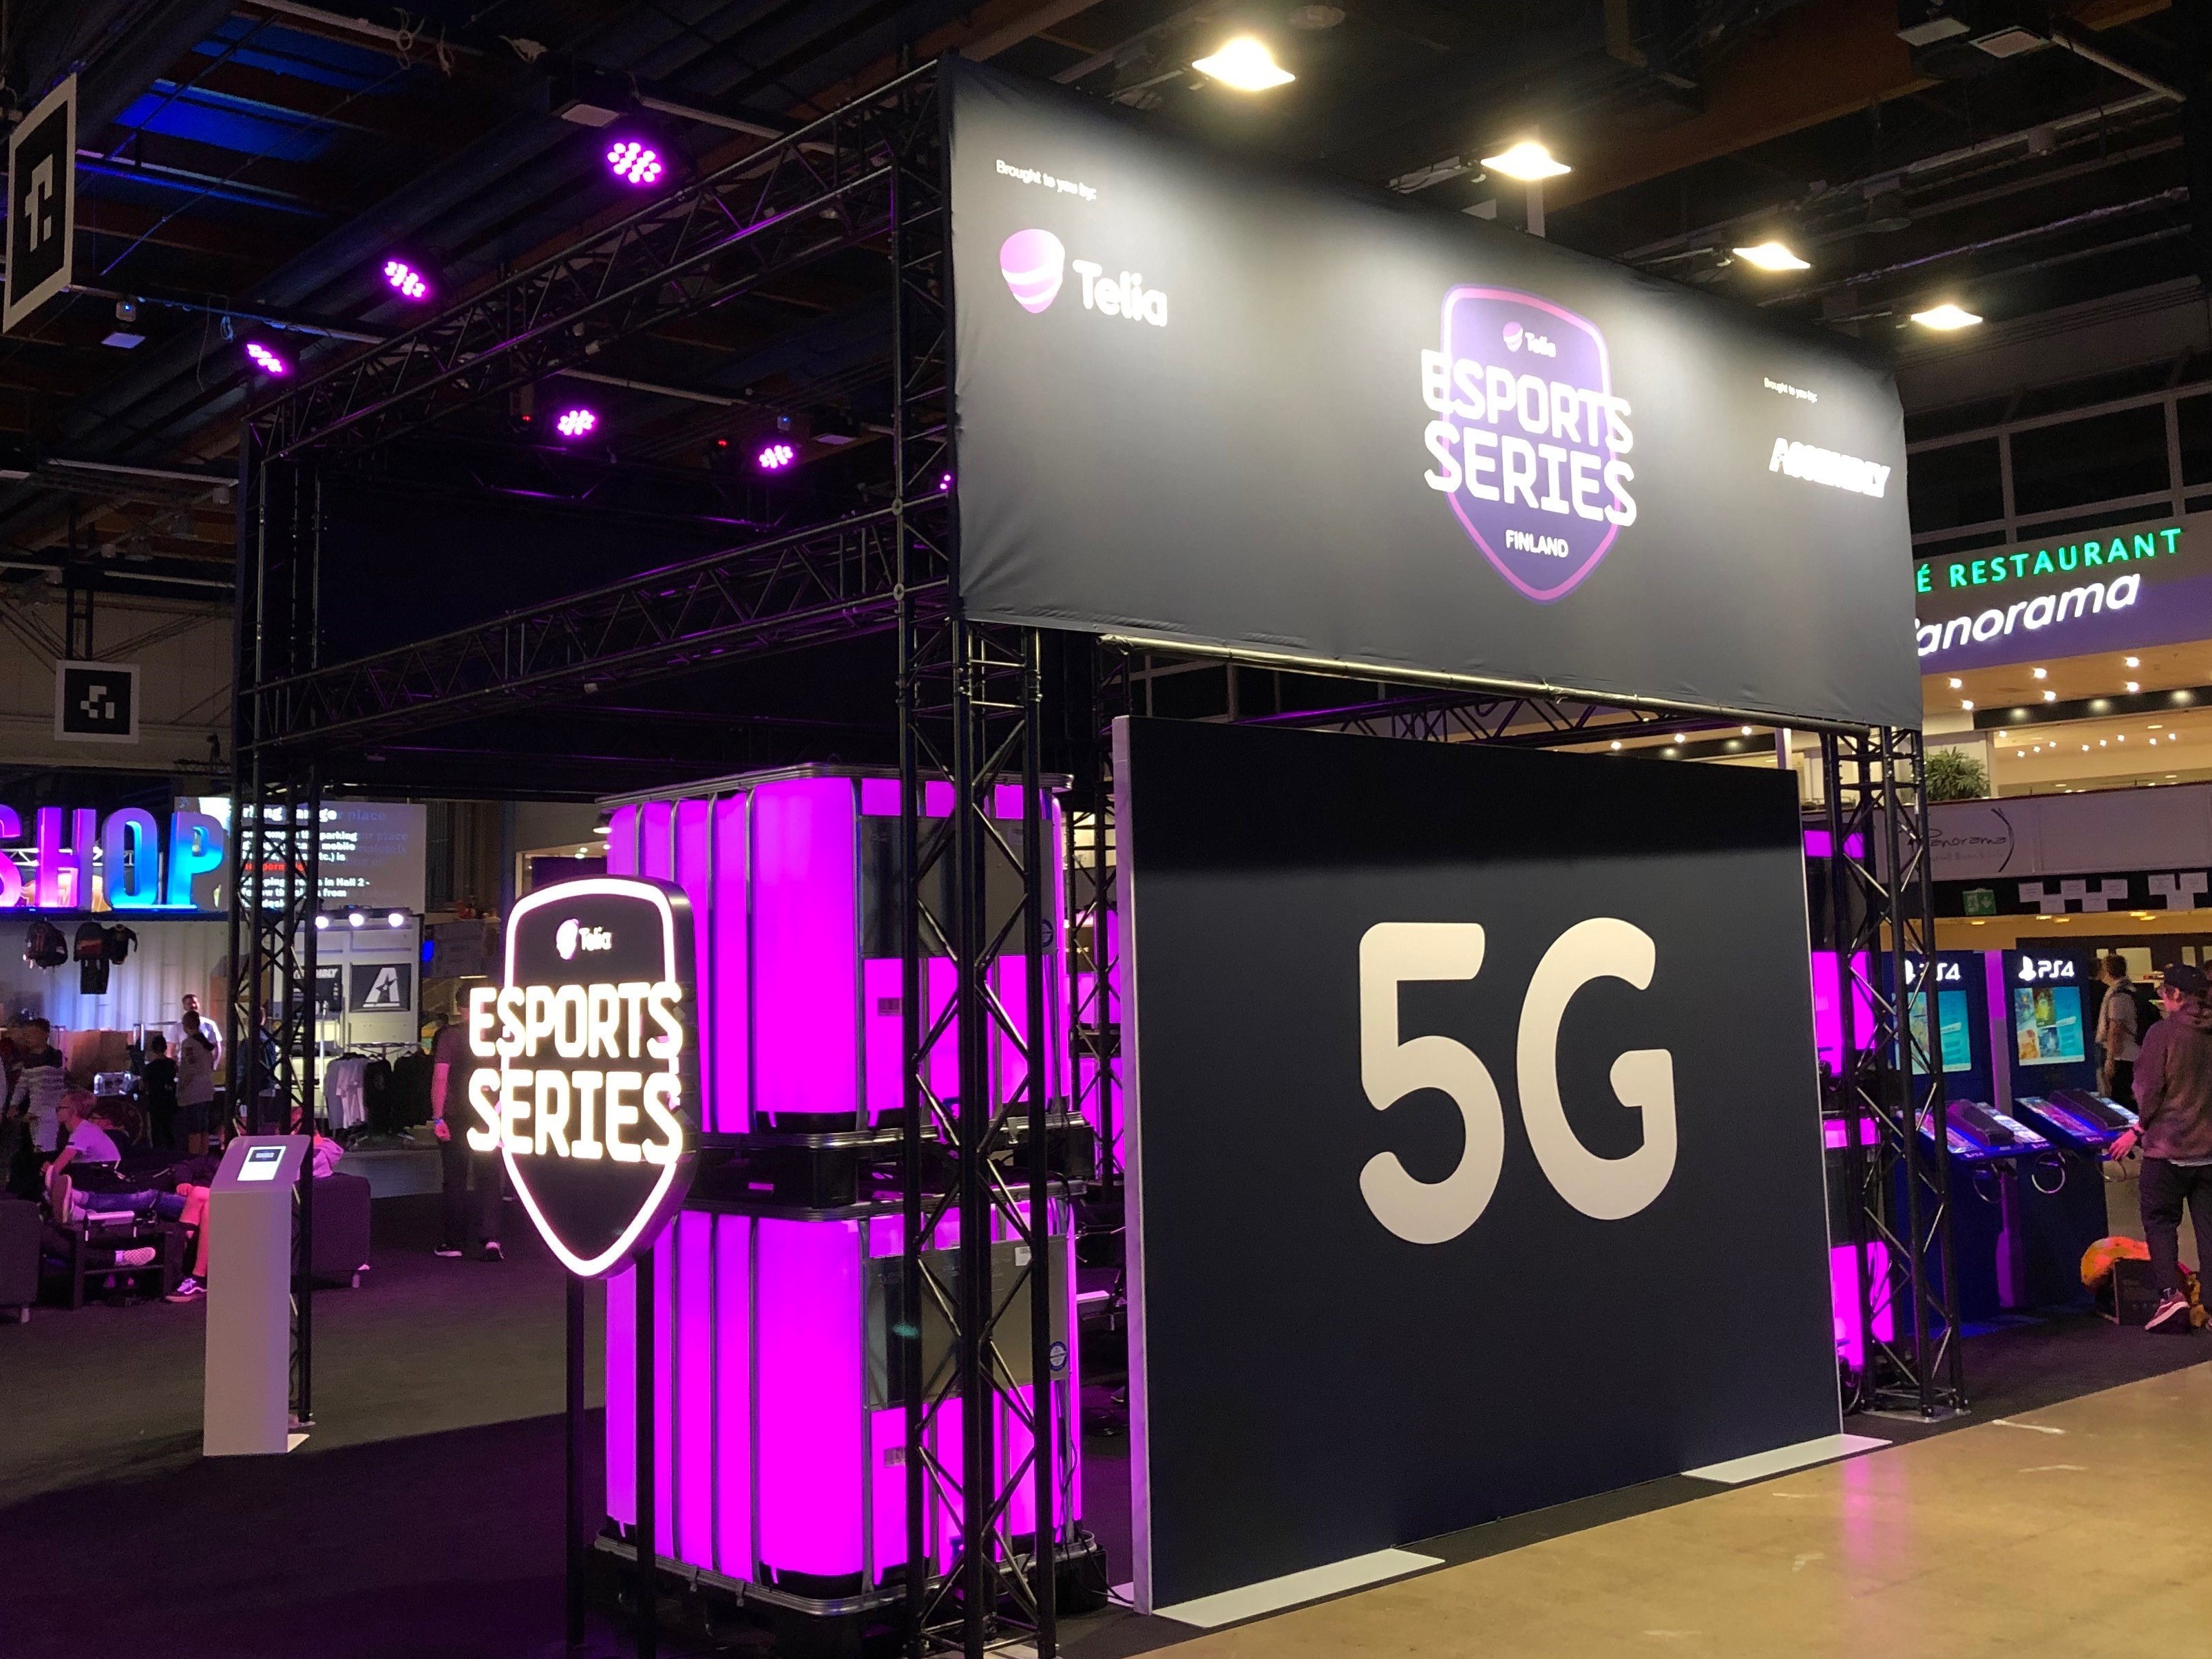 Beskrivende afskaffe stamme Markus Heikkilä on Twitter: "Welcome to have a chat regarding 5G to the  Telia Lounge. We have some 5G experts onsite during Friday afternoon. This  is also a great place to relax